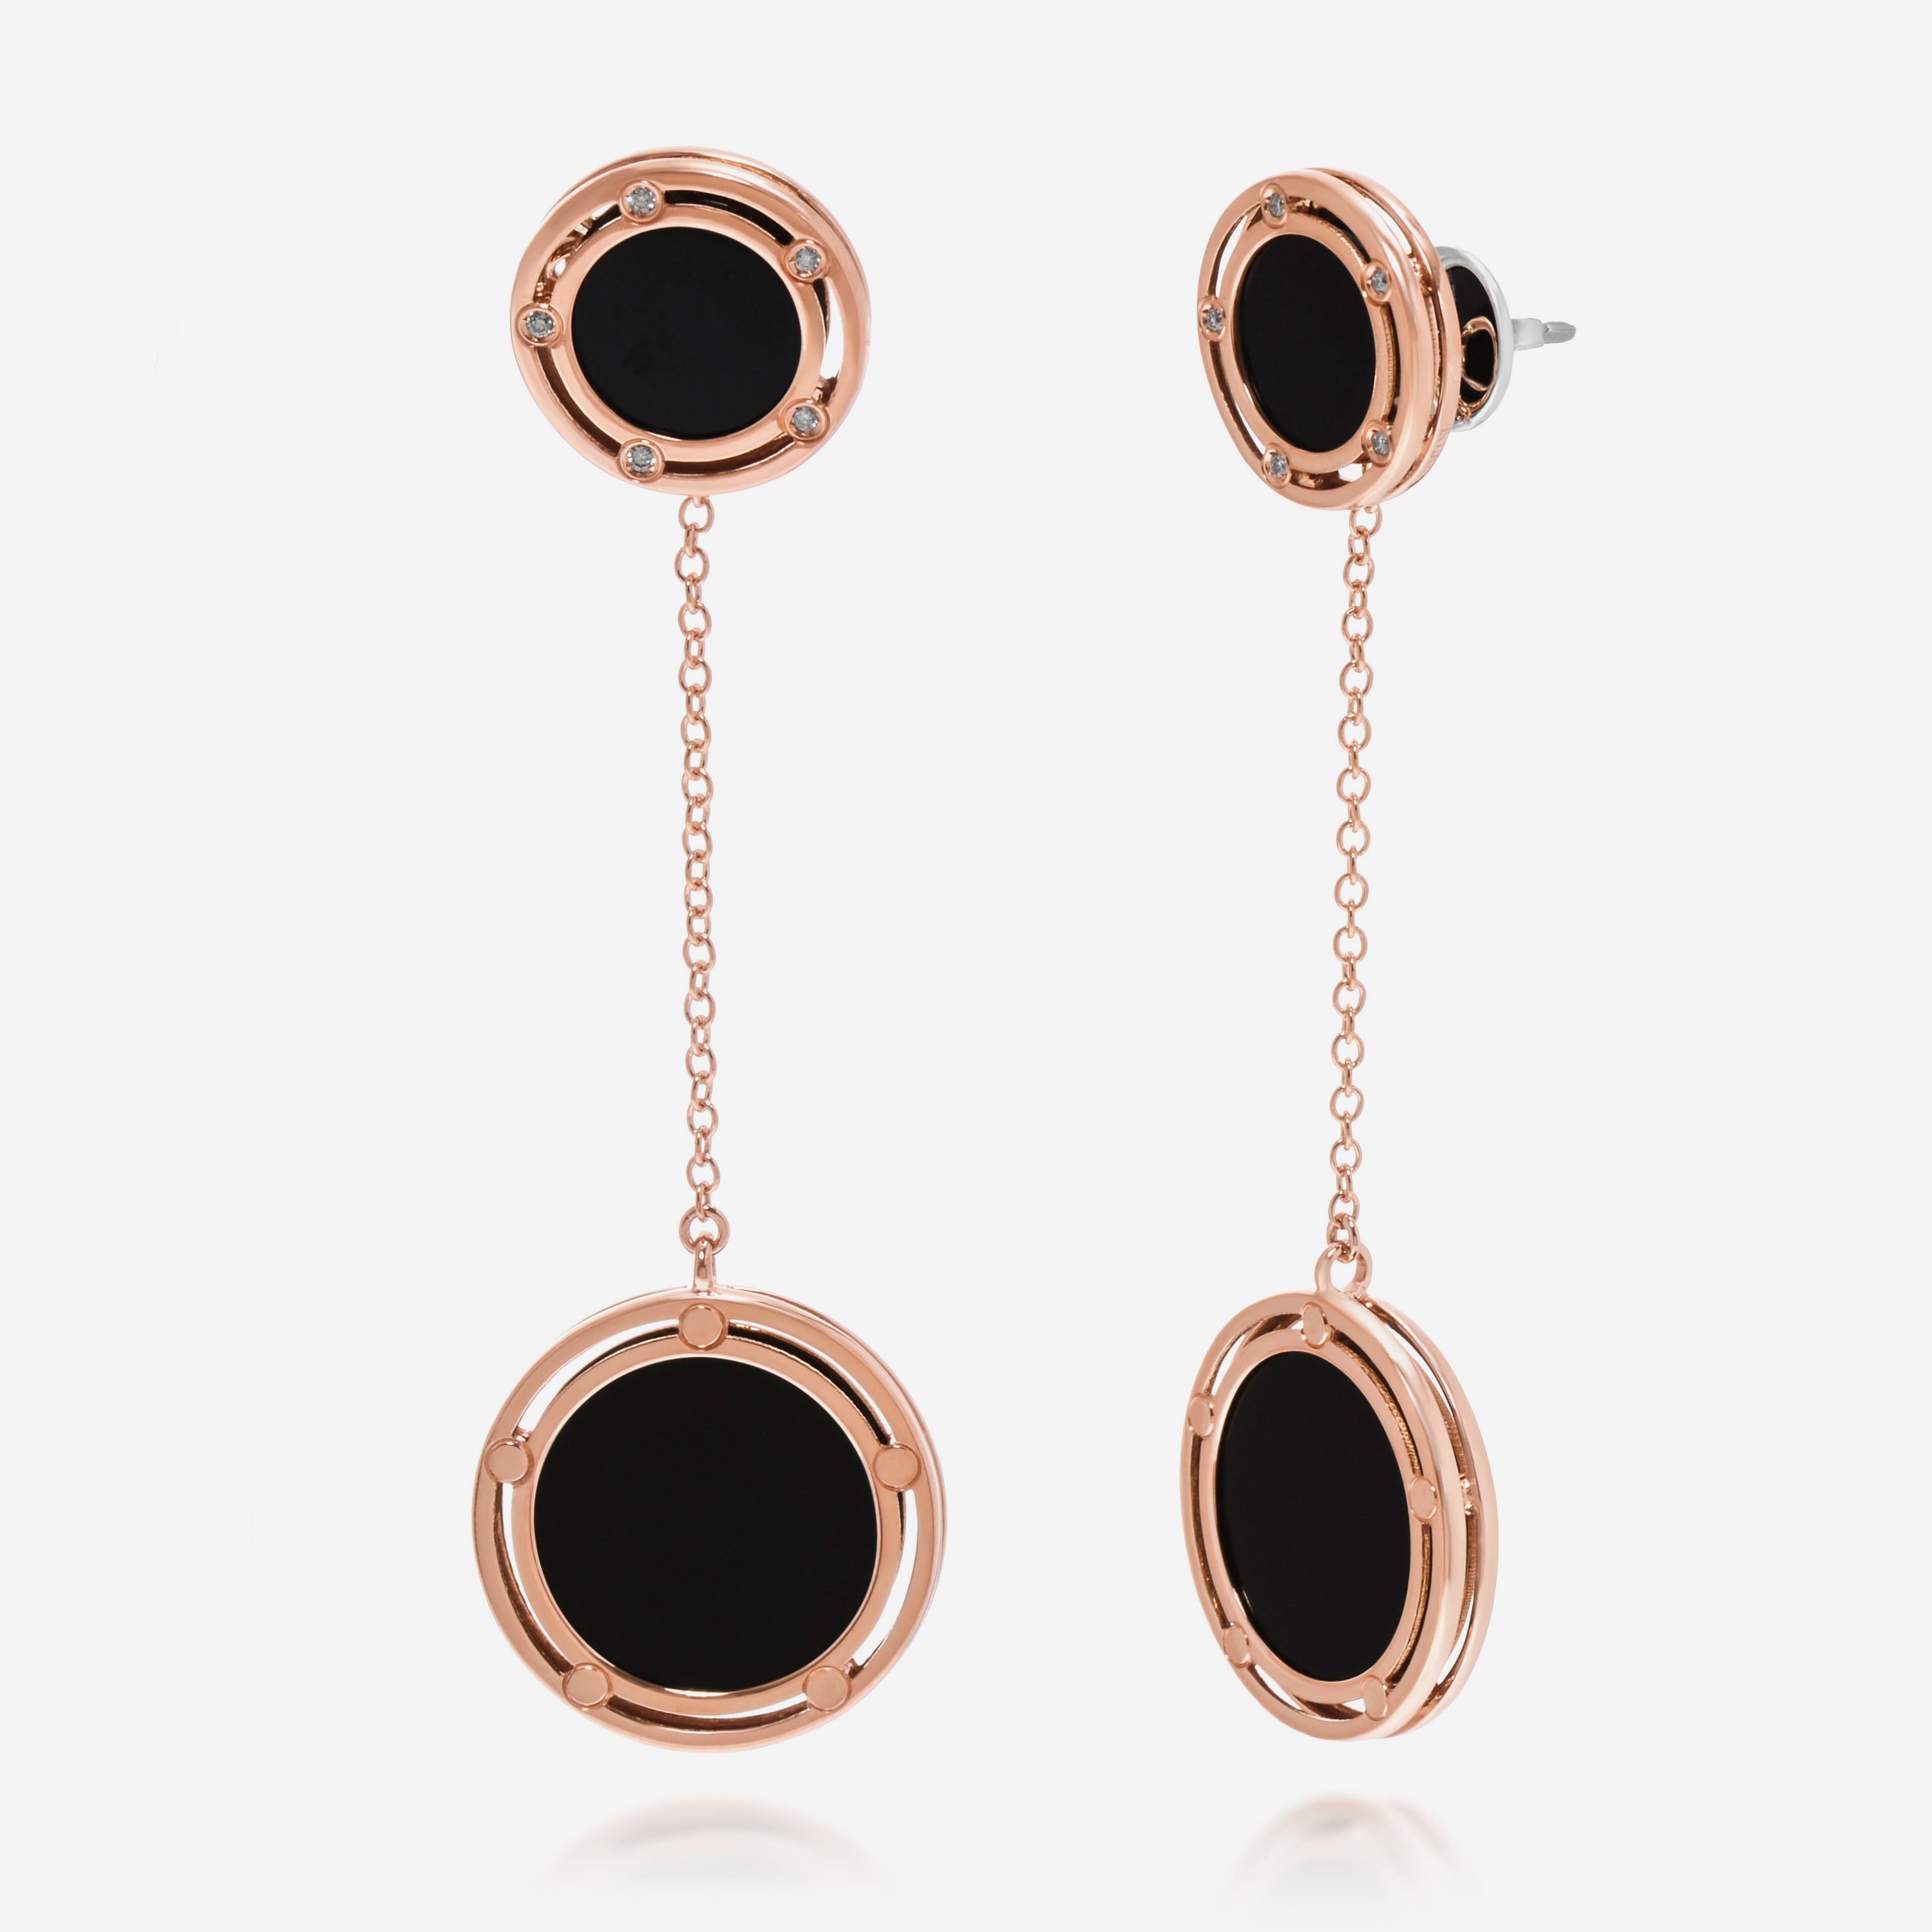 Damiani D.Side 18K Rose Gold Diamond and Onyx Drop Earrings 20080106 - THE SOLIST